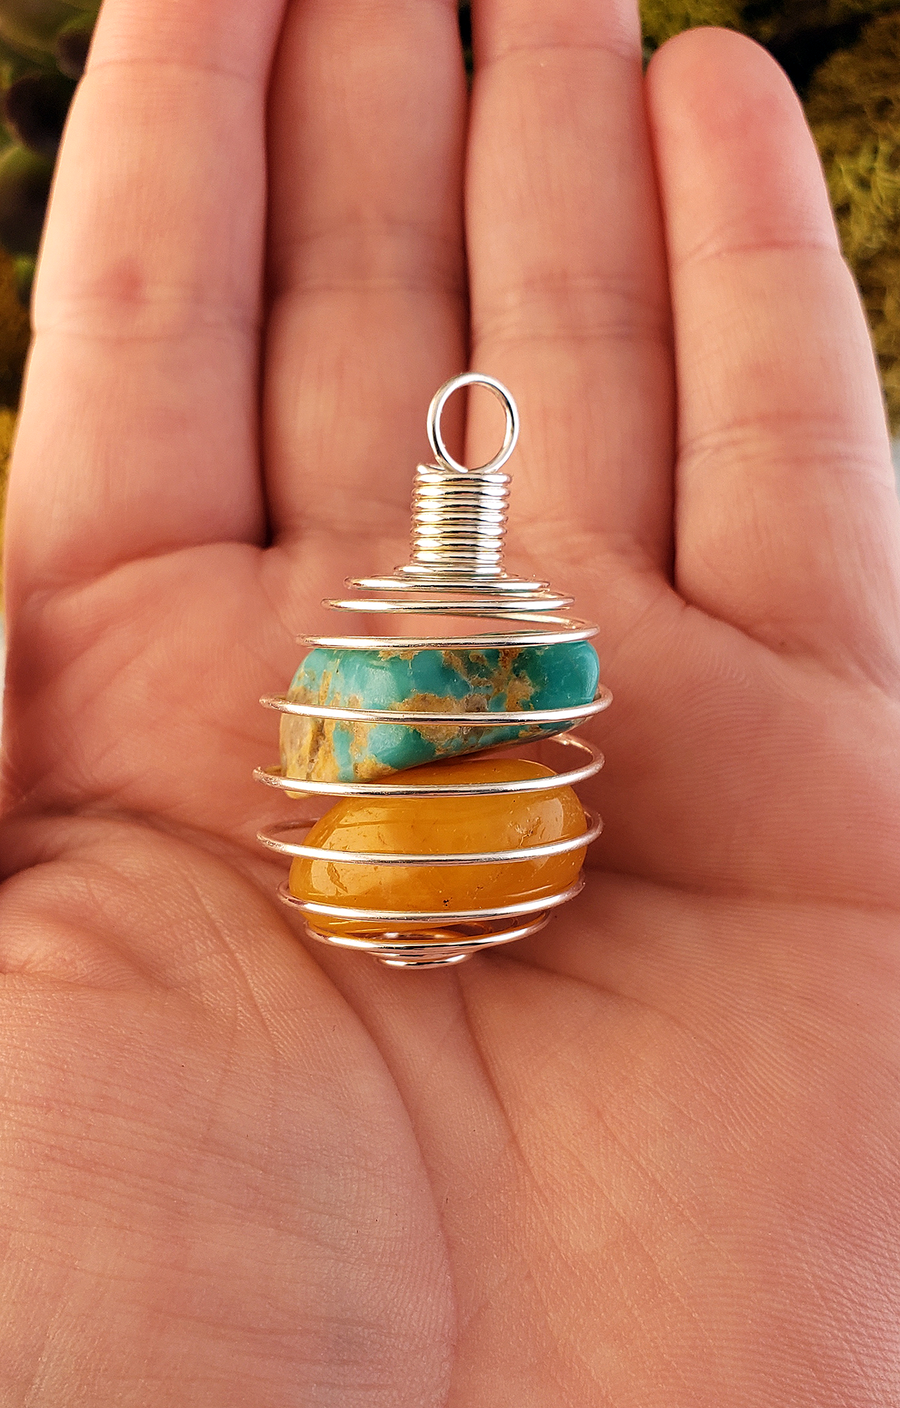 Silver-Colored Metal Spiral Cage Ornament Pendant - Perfect for Holding Gemstones or Orbs! - With Turquoise and Apricot Quartz on Display